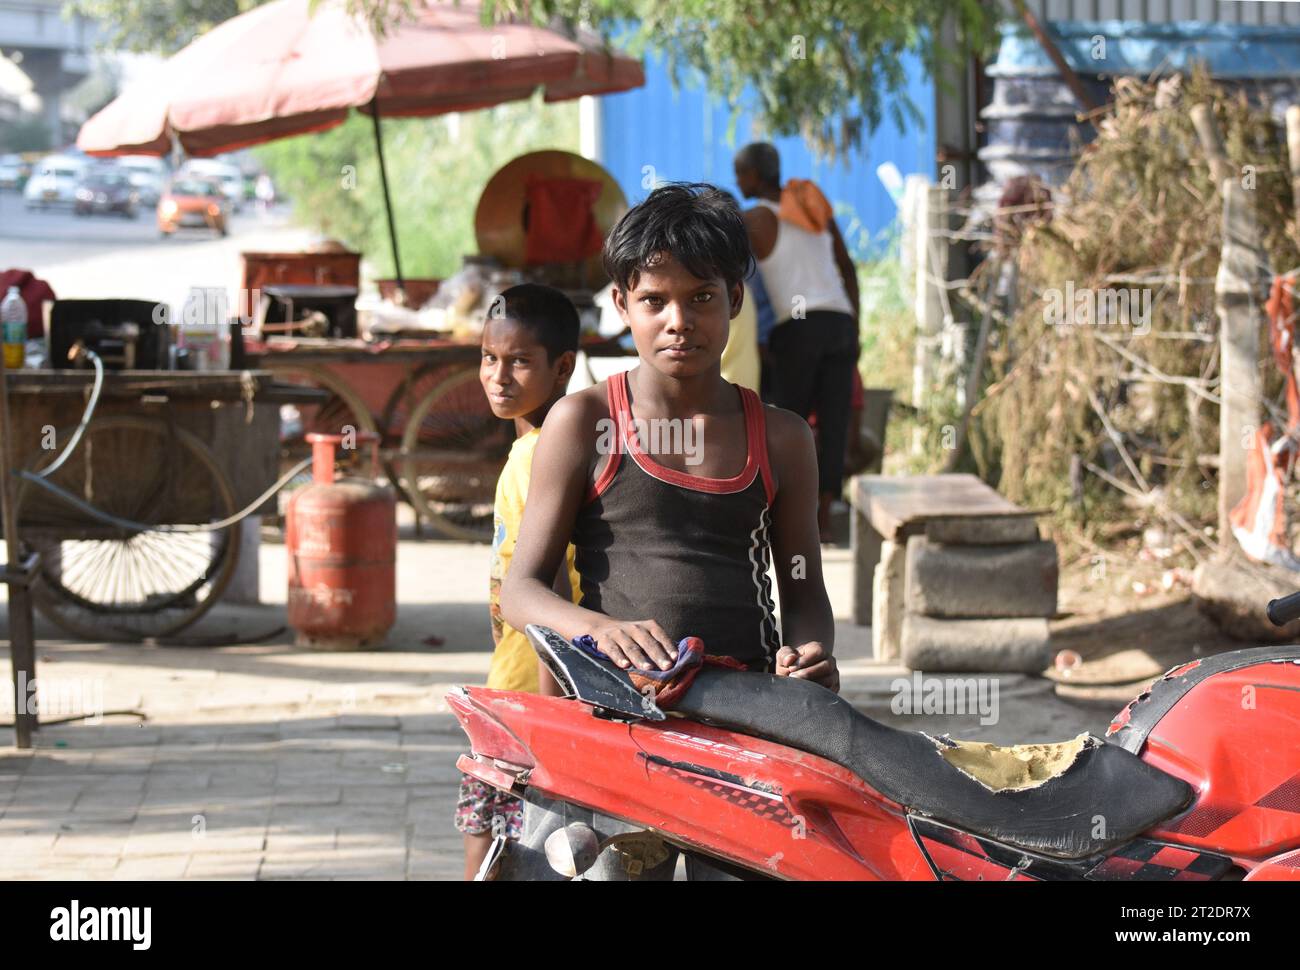 A boy aged about 12 years old cleaning the seat of a reclaimed motorcycle he plans to refurbish on the streets of New Delhi Stock Photo